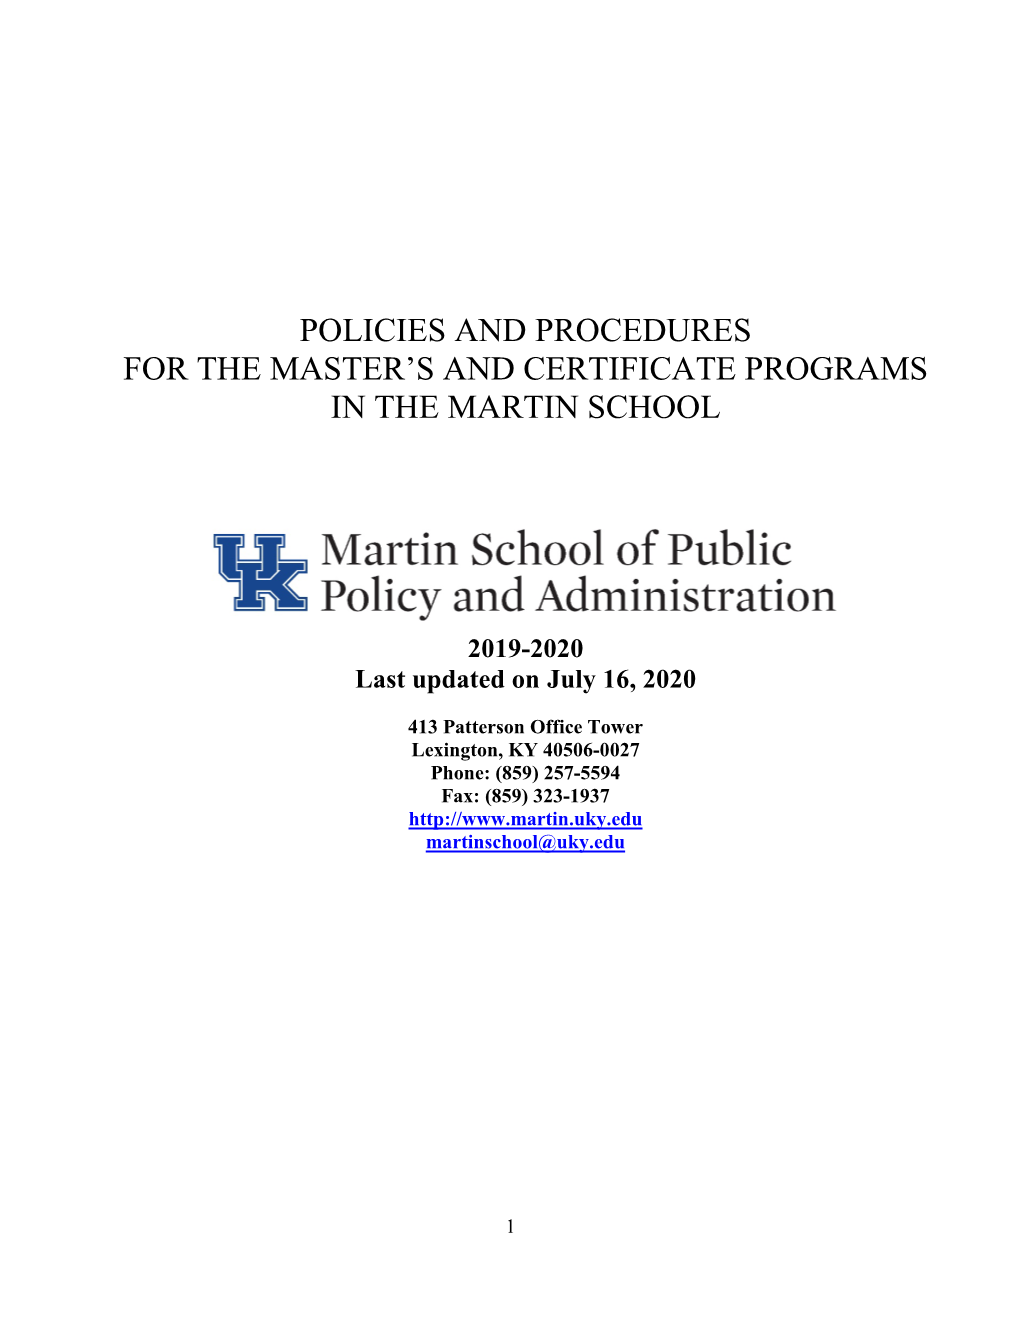 Policies and Procedures for the Master's And